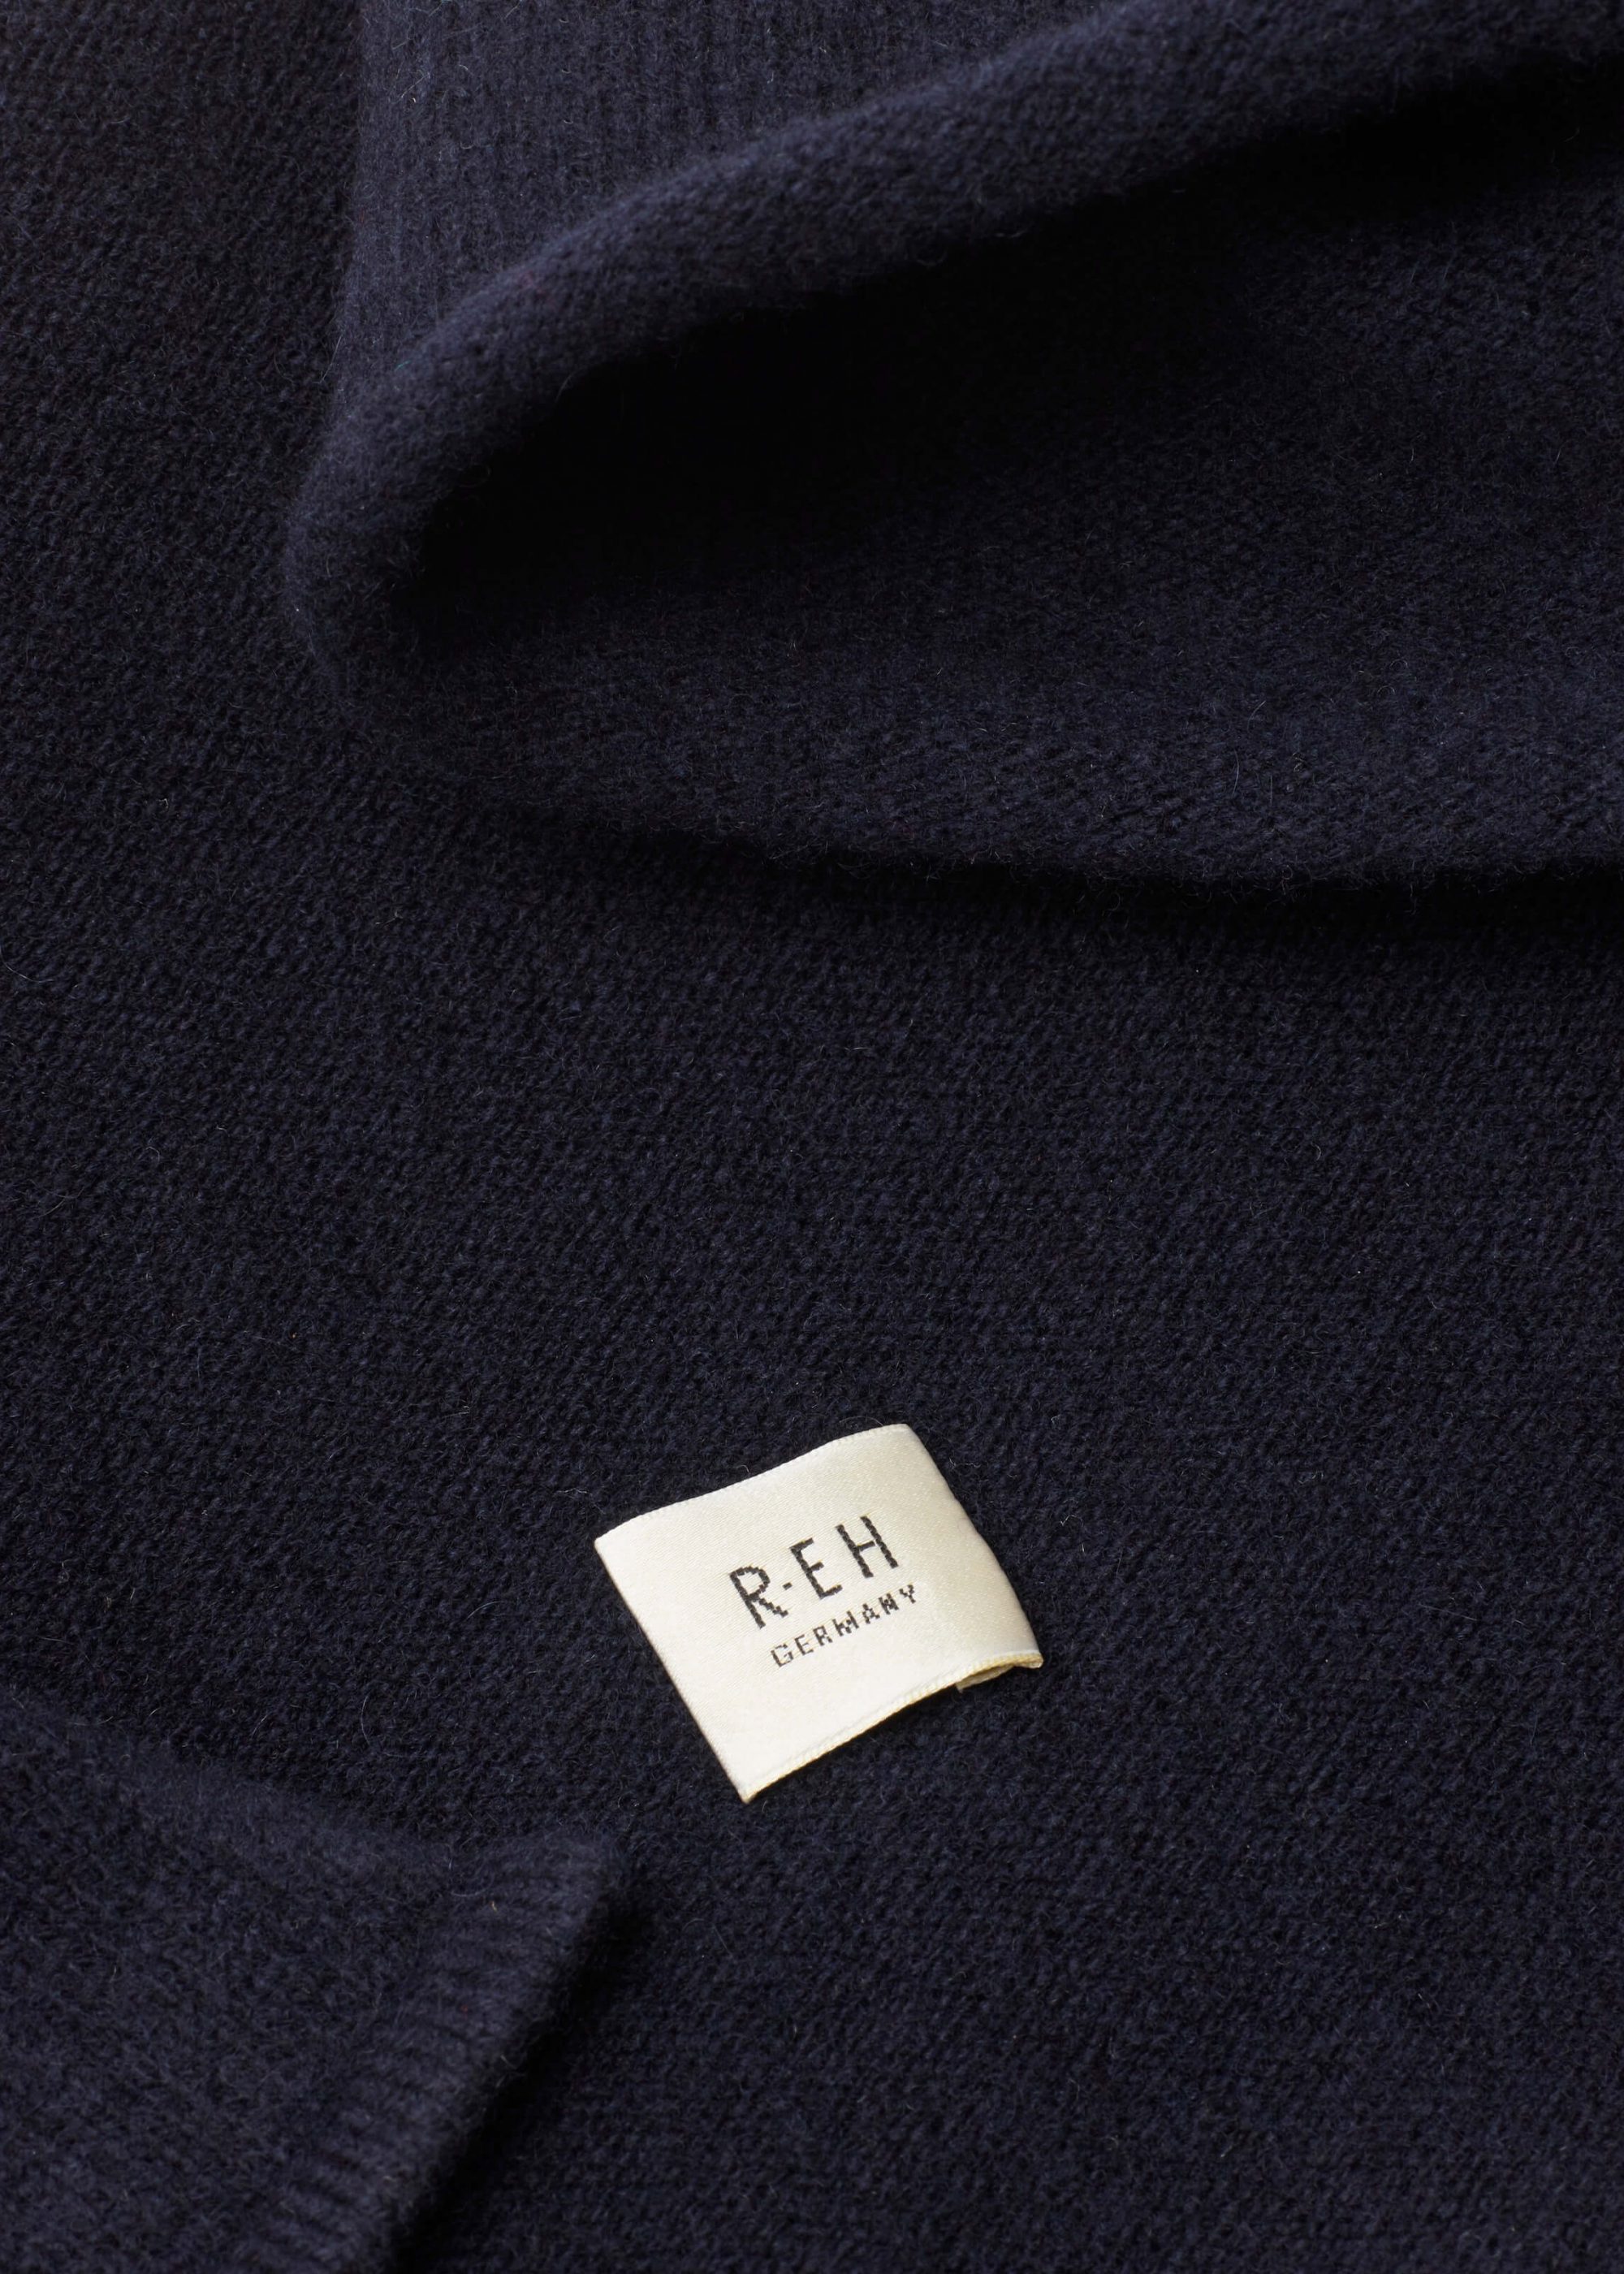 Product image for »Planck« Navy Scarf Felted Cashmere Merino